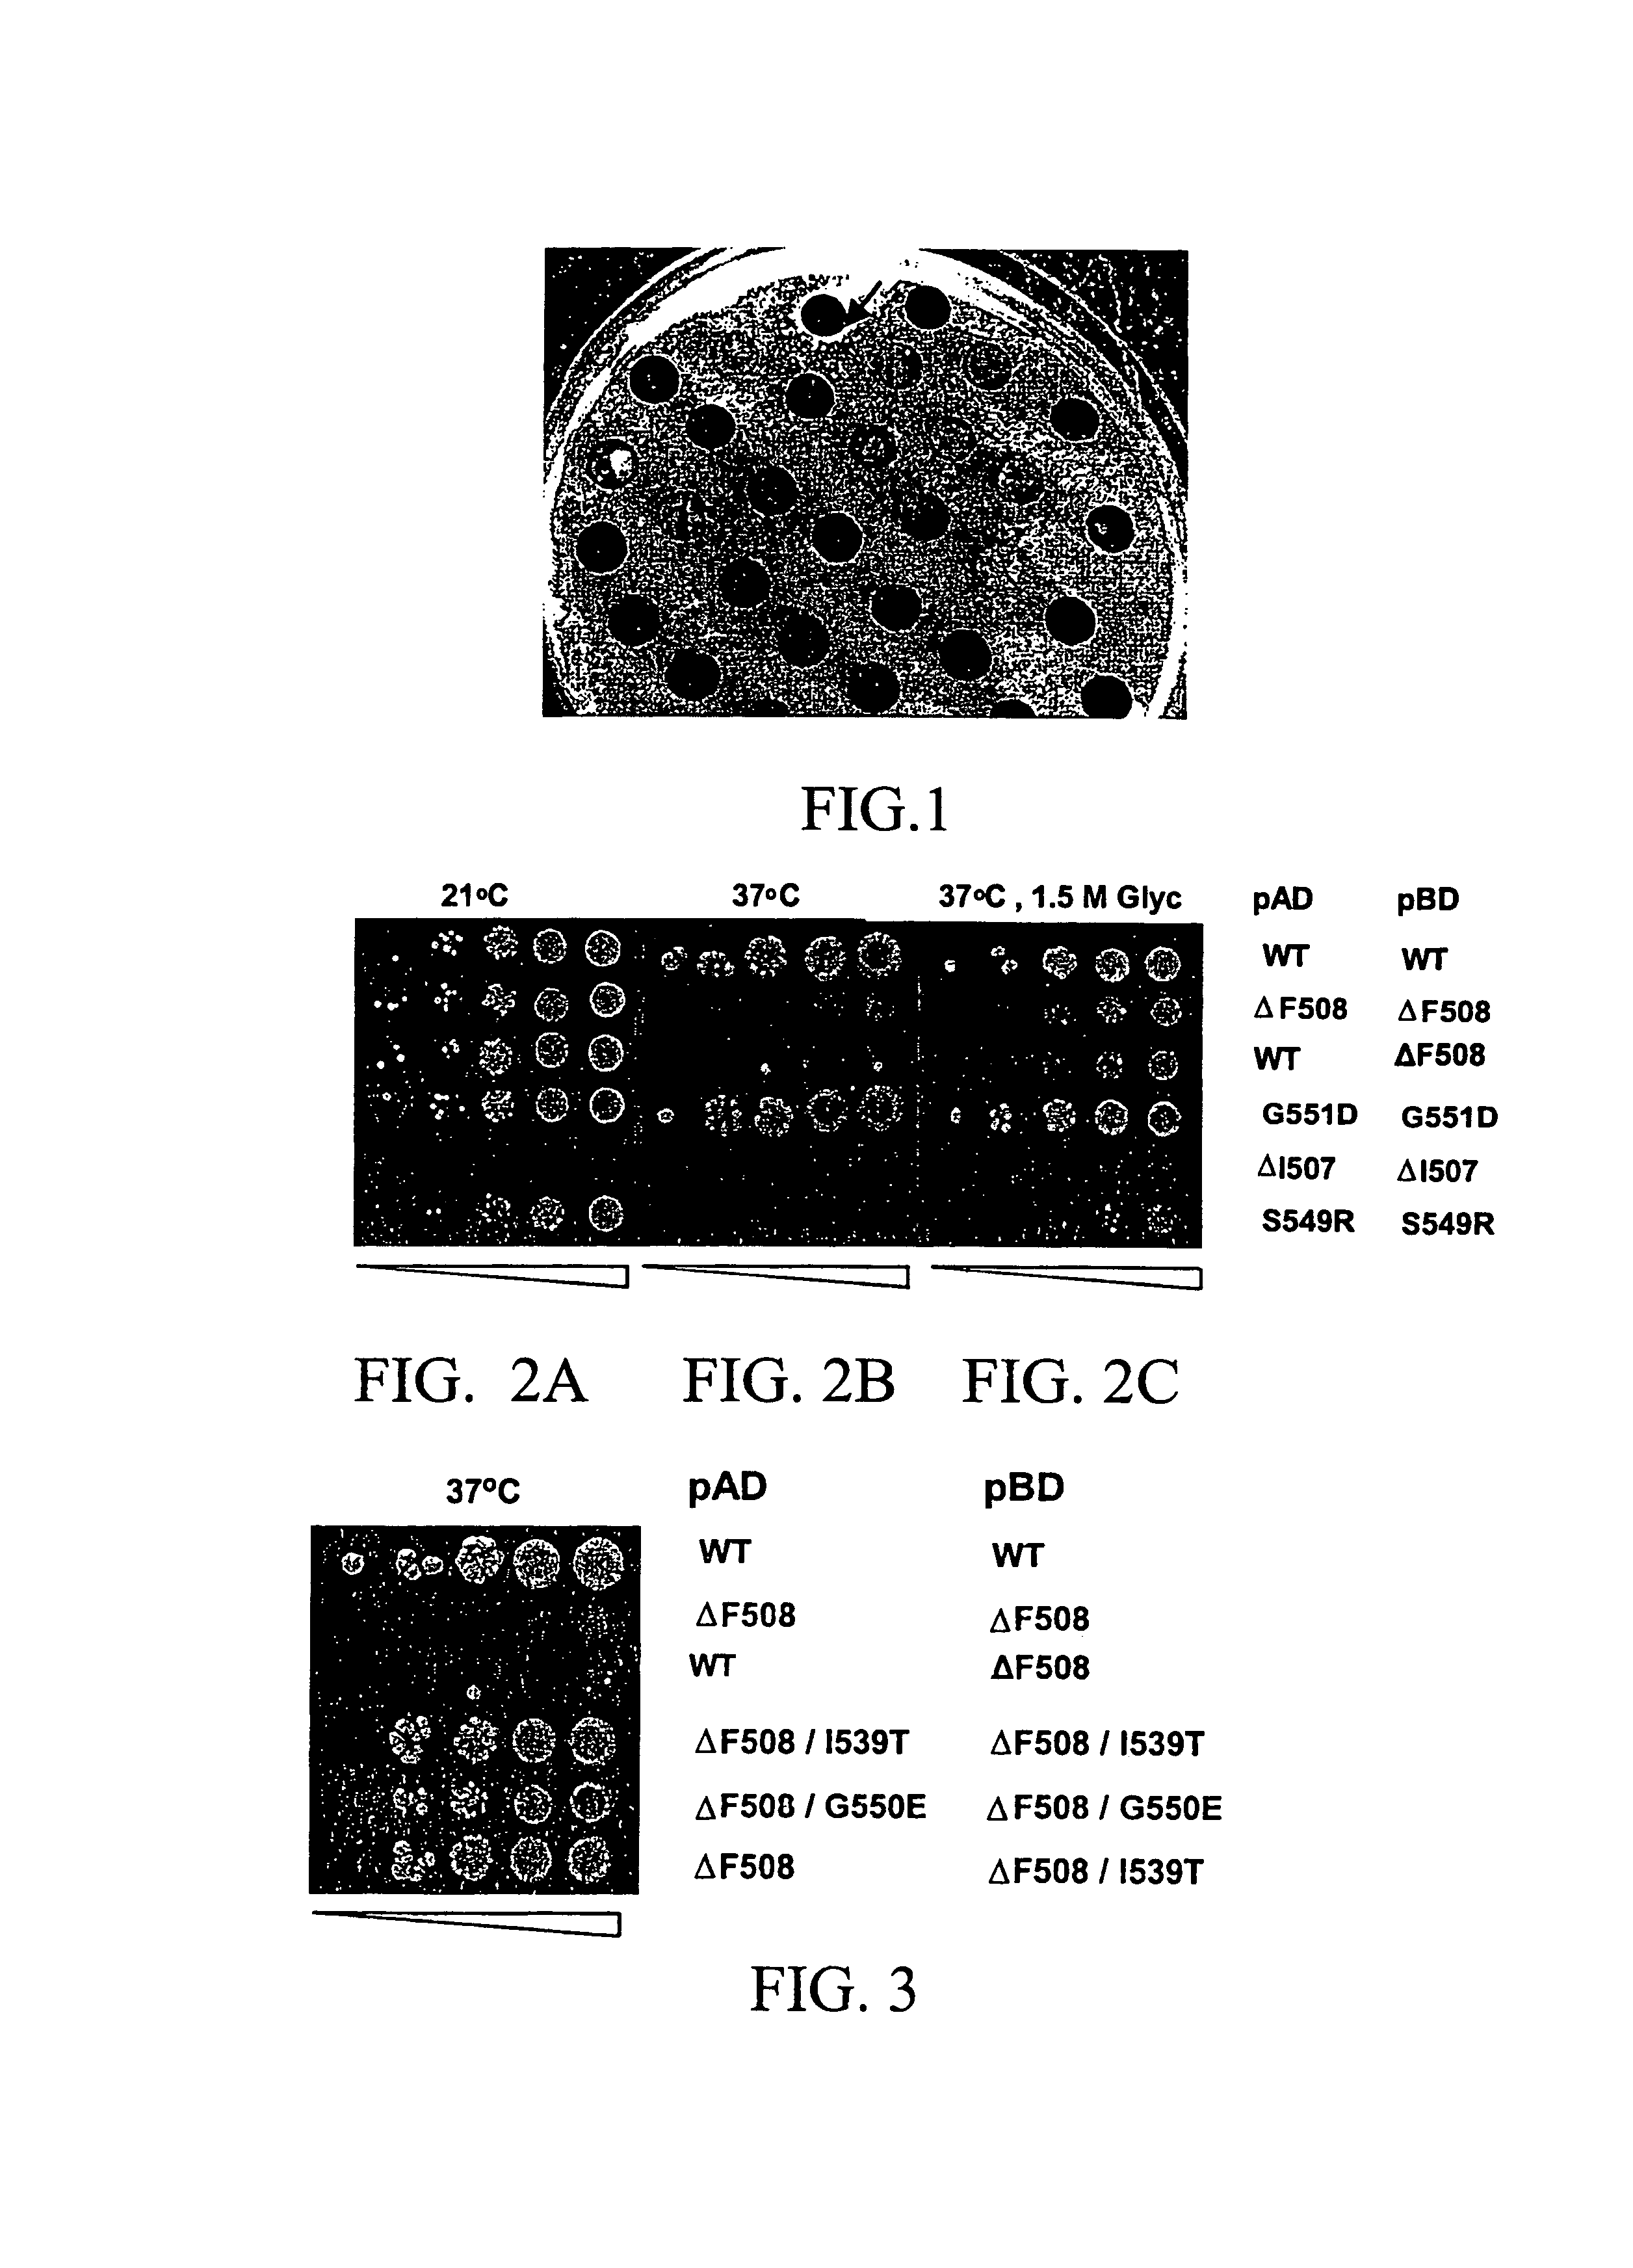 Materials and methods for detecting interaction of CFTR polypeptides